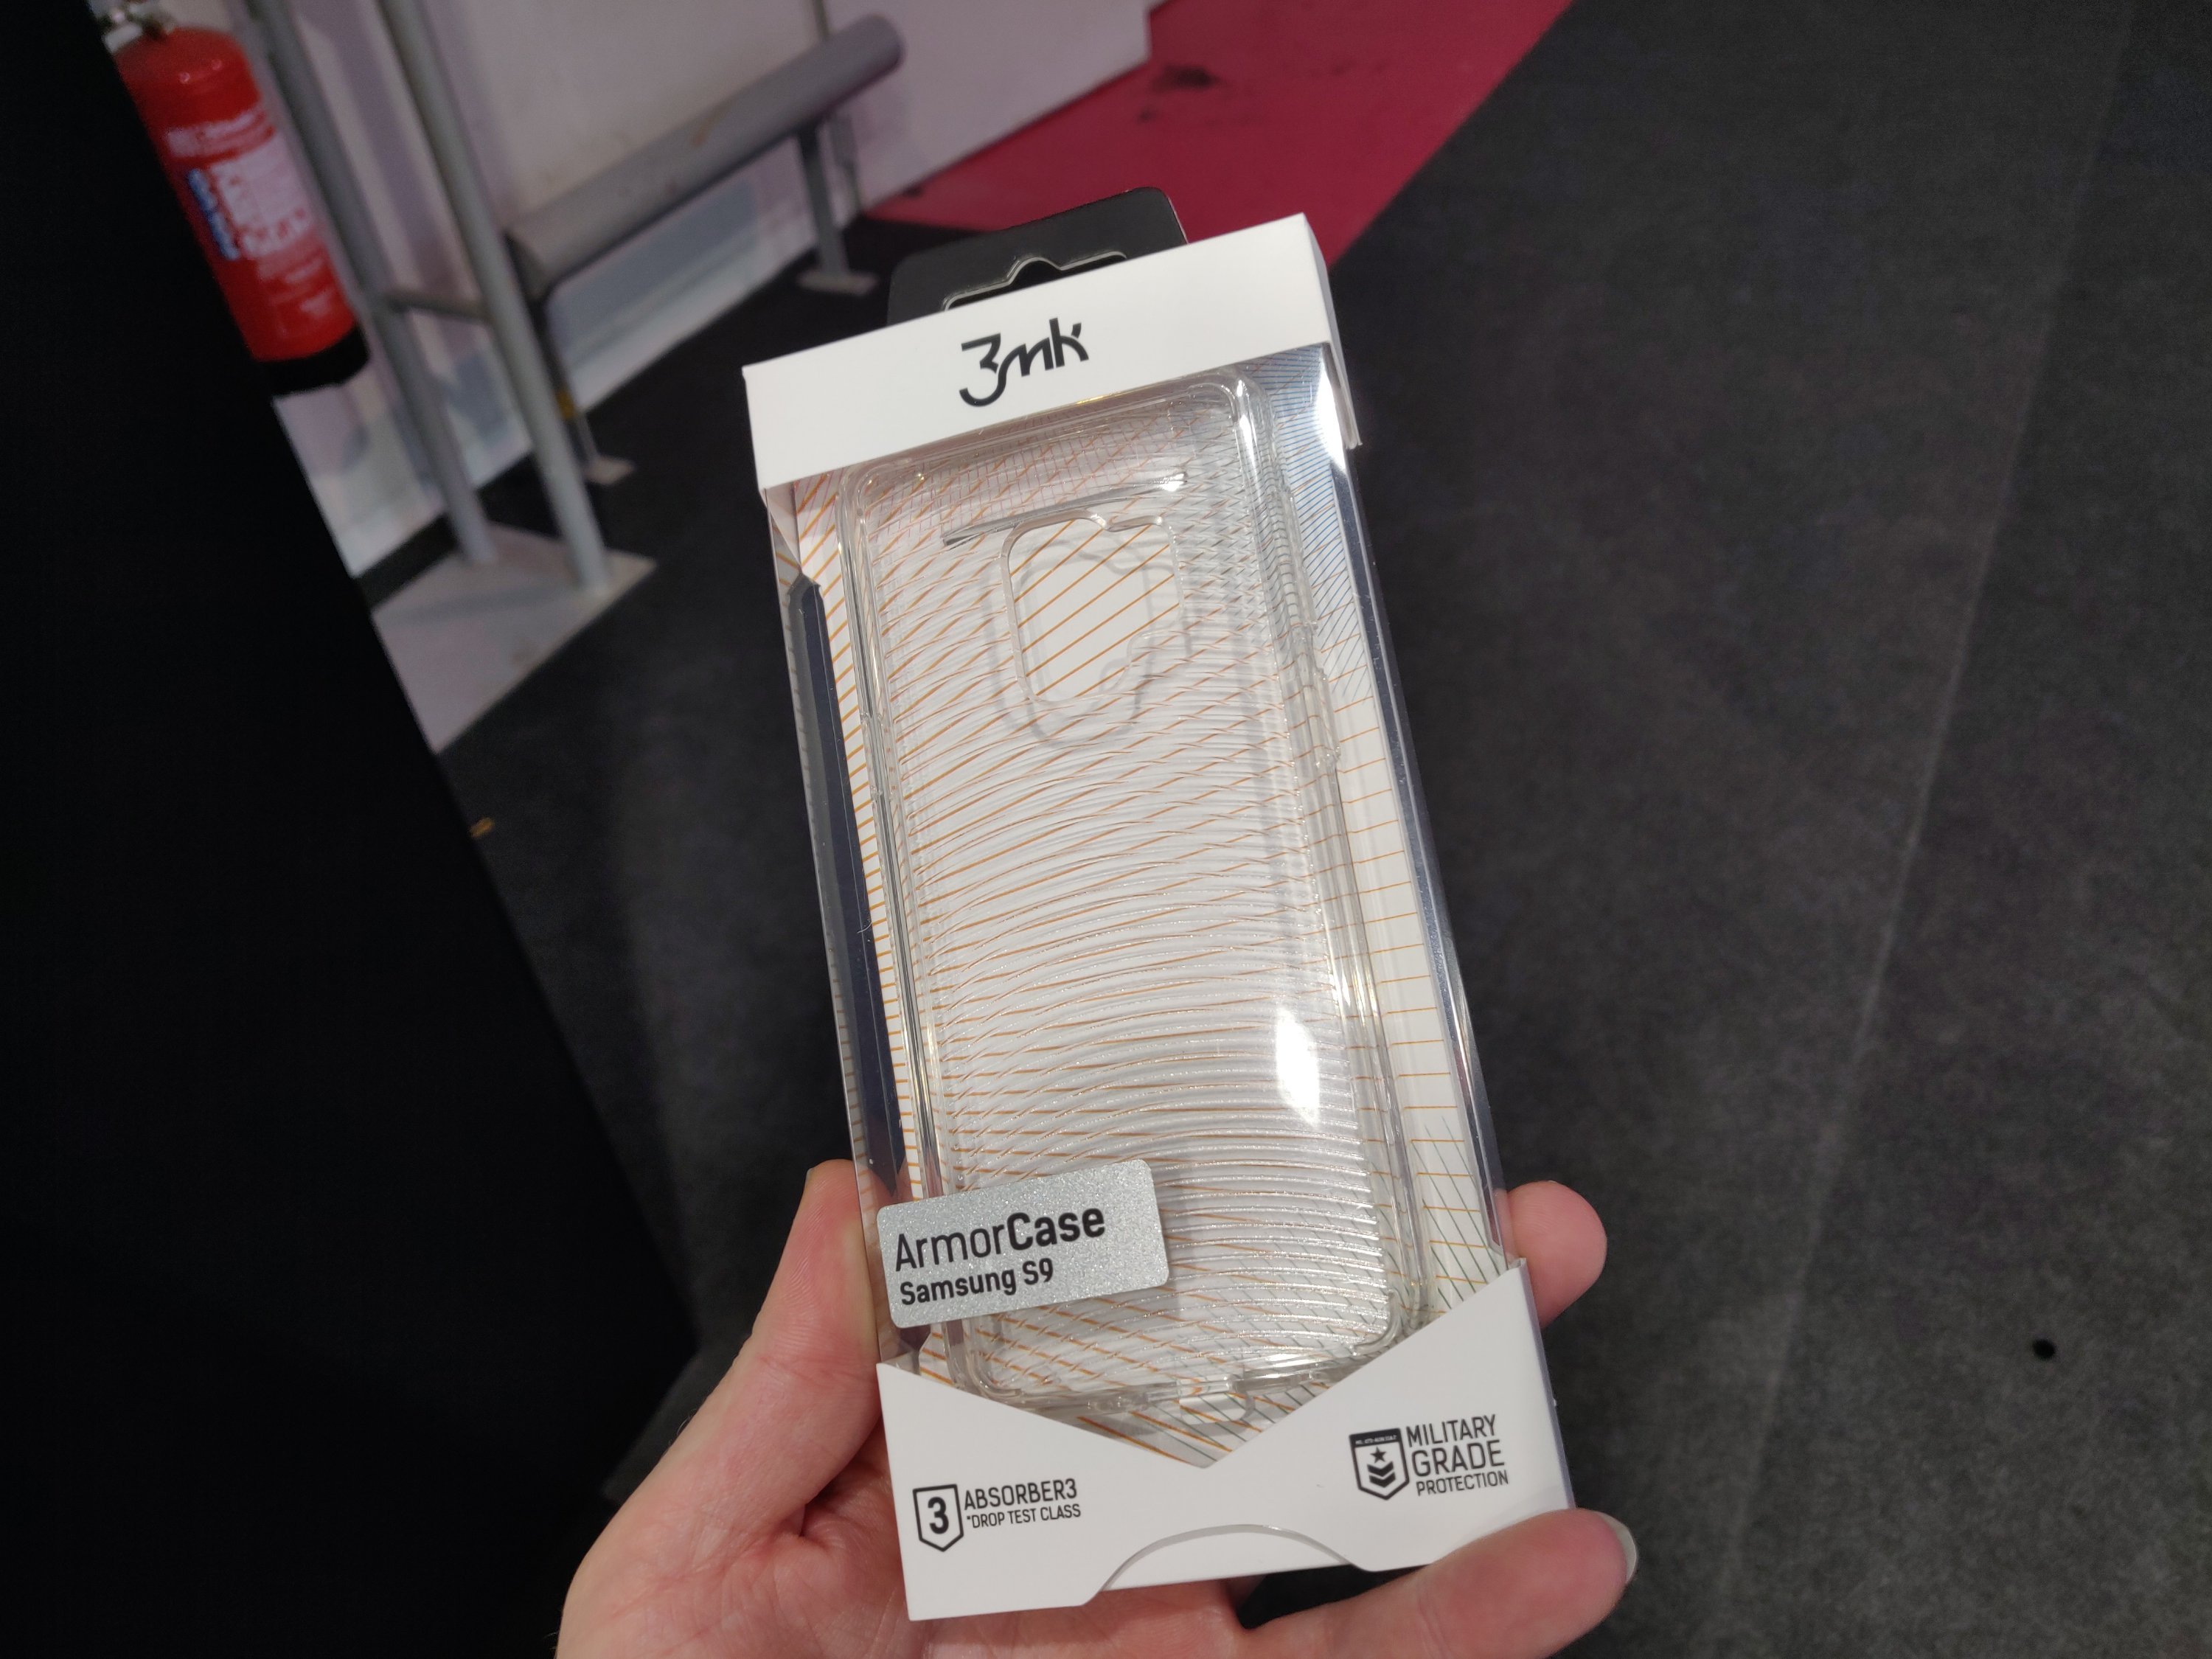 MWC  3MK have new cases to show us